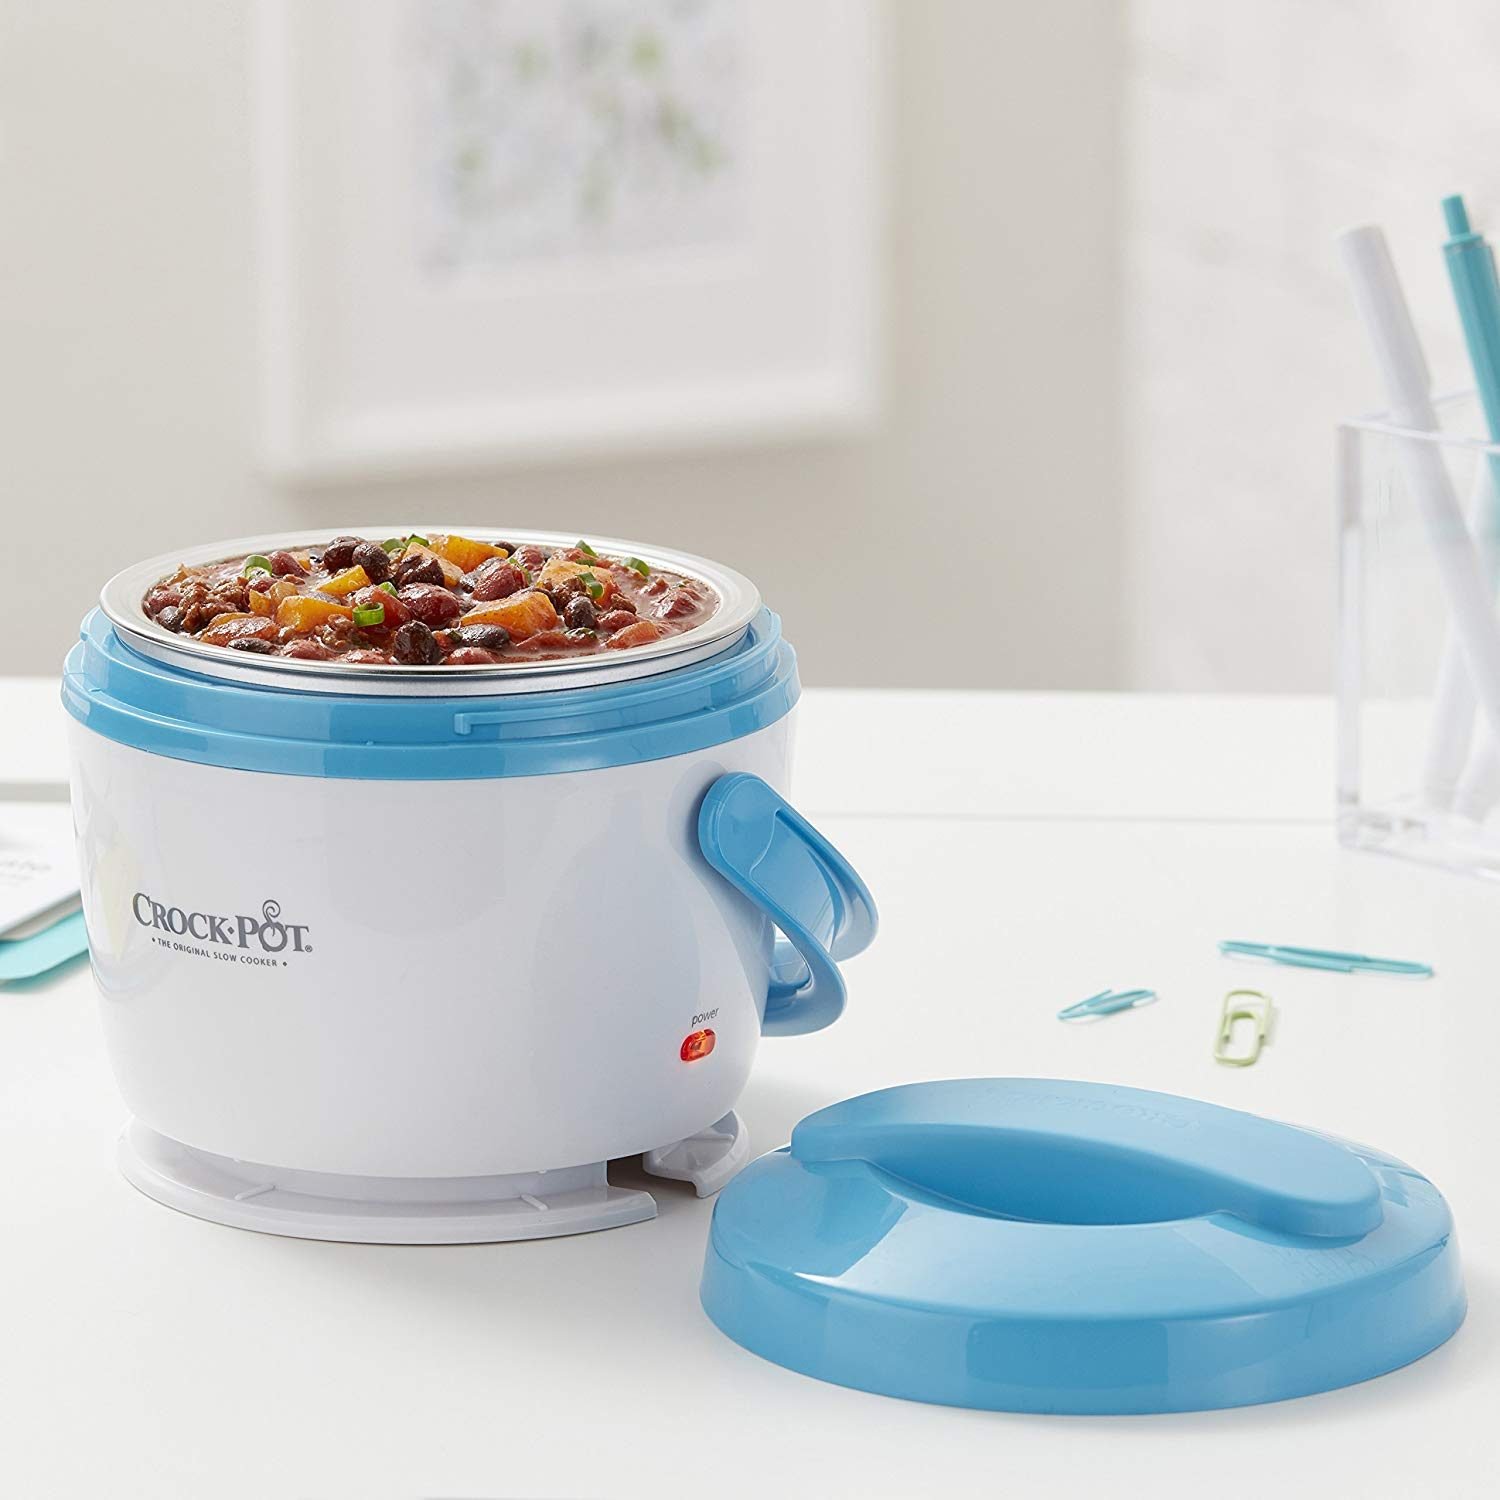 The Crock-Pot Lunch Crock Food Warmer Tested and Reviewed